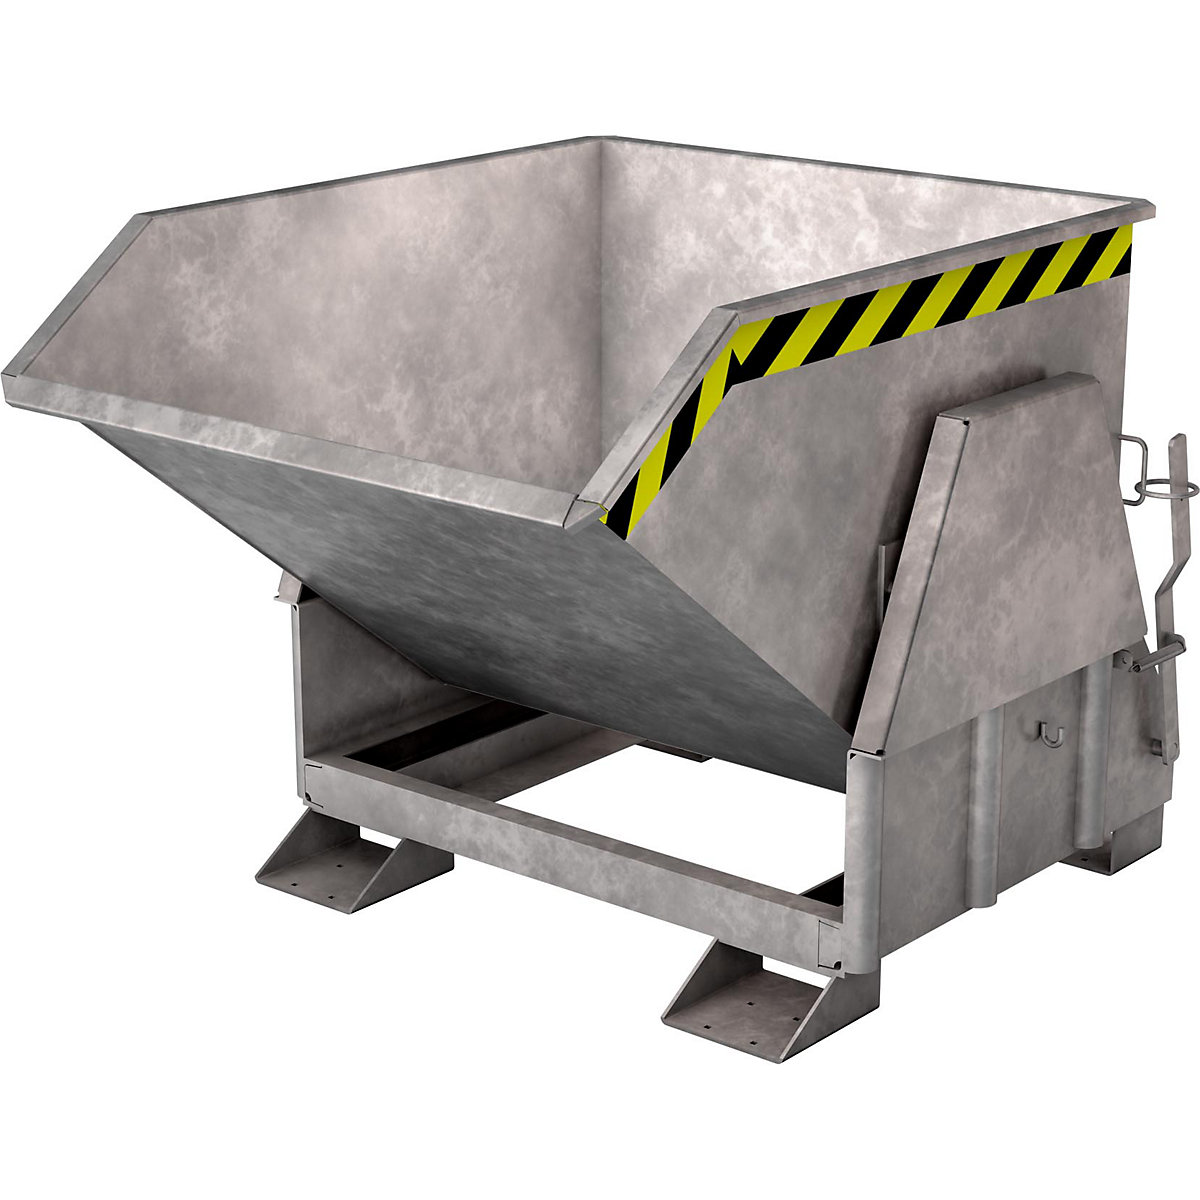 Tilting skip, standard overall height, without wheels – eurokraft pro, capacity 1.2 m³, hot dip galvanised-9